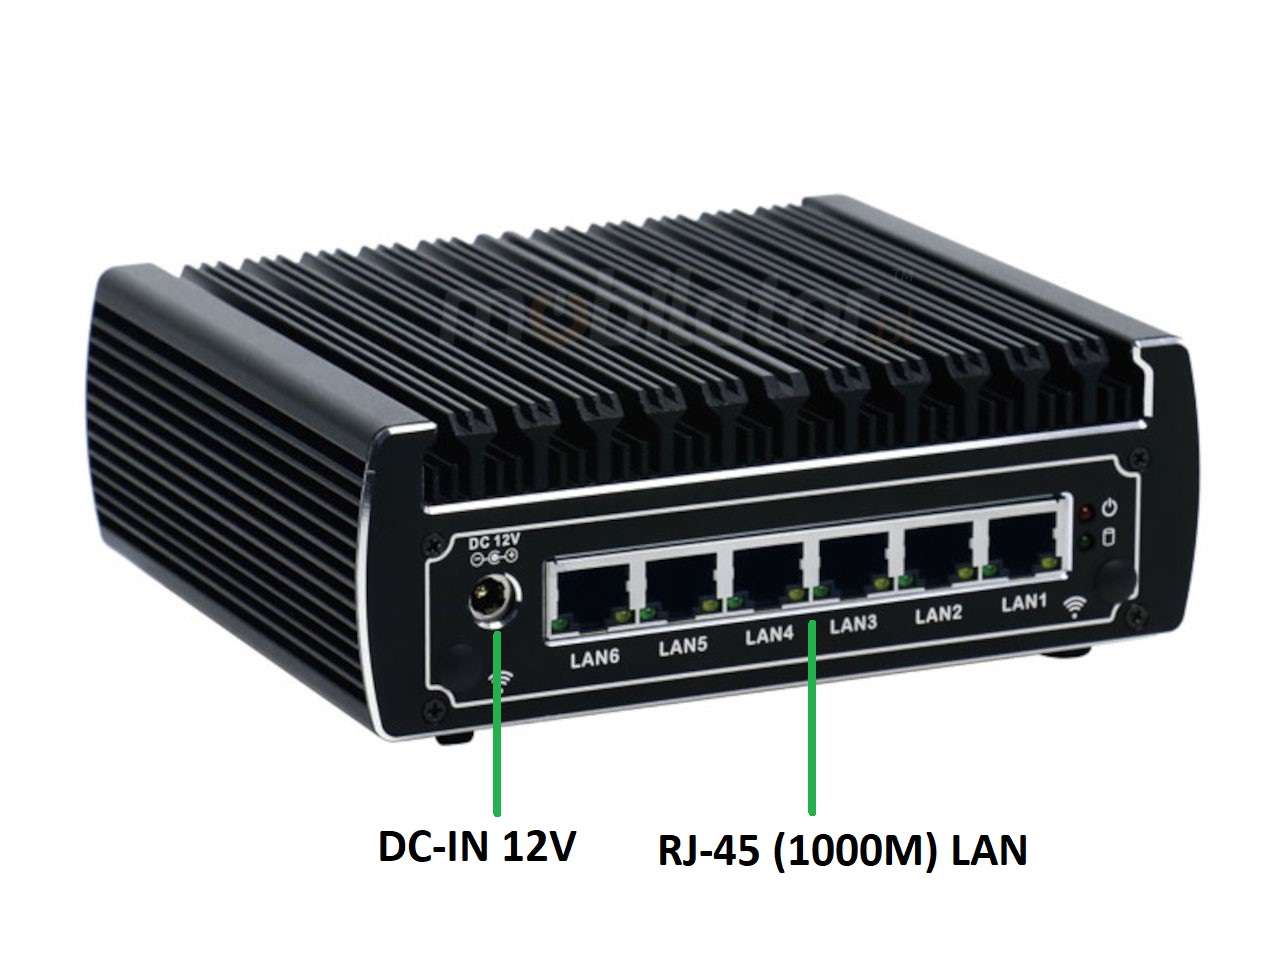  IBOX N133 v.7, back IO, industrial small fast reliable fanless industrial small LAN INTEL i3 HDD DDR4